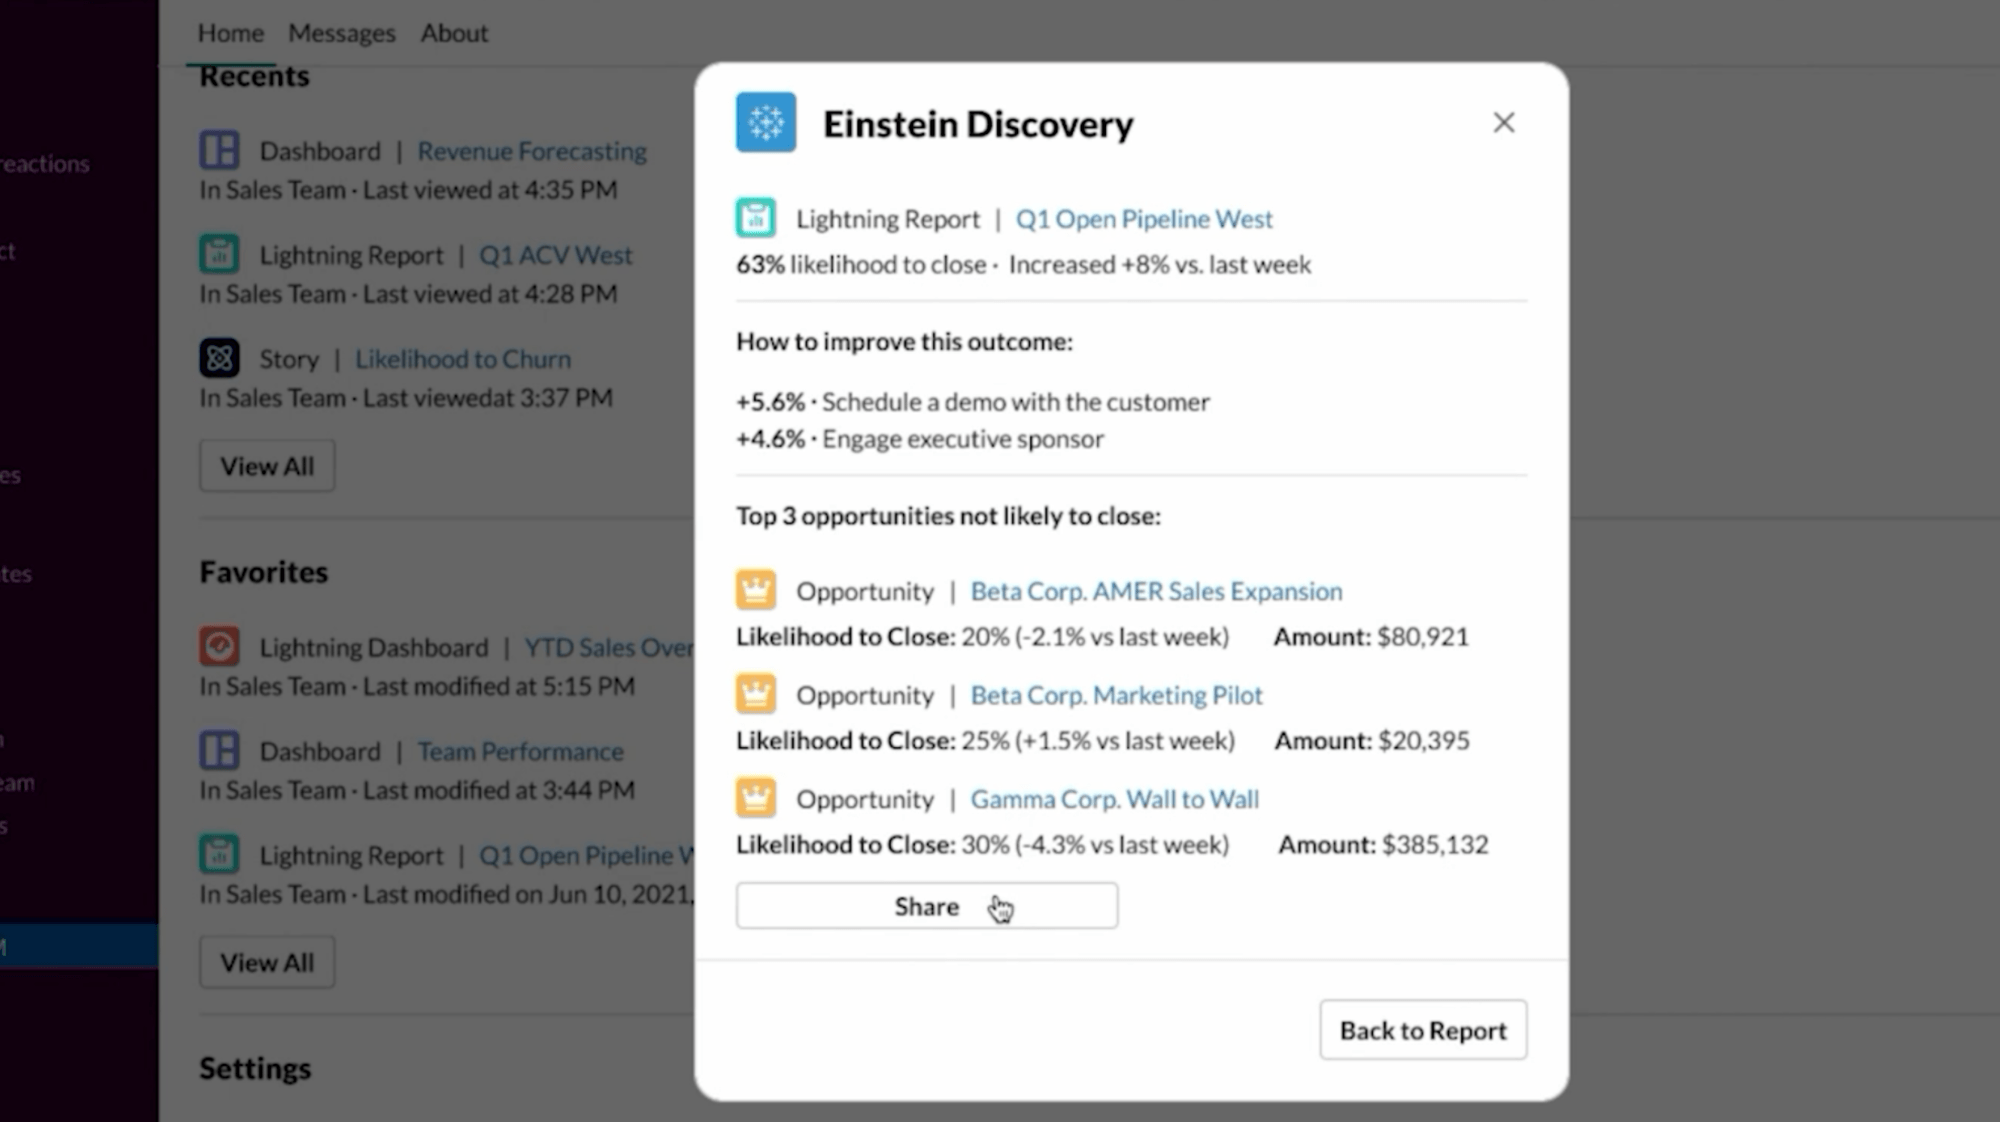 Slack screen with Einstein Discovery dialog box open, displaying AI predictions for a pipeline Lightning Report, with the option to share within Slack